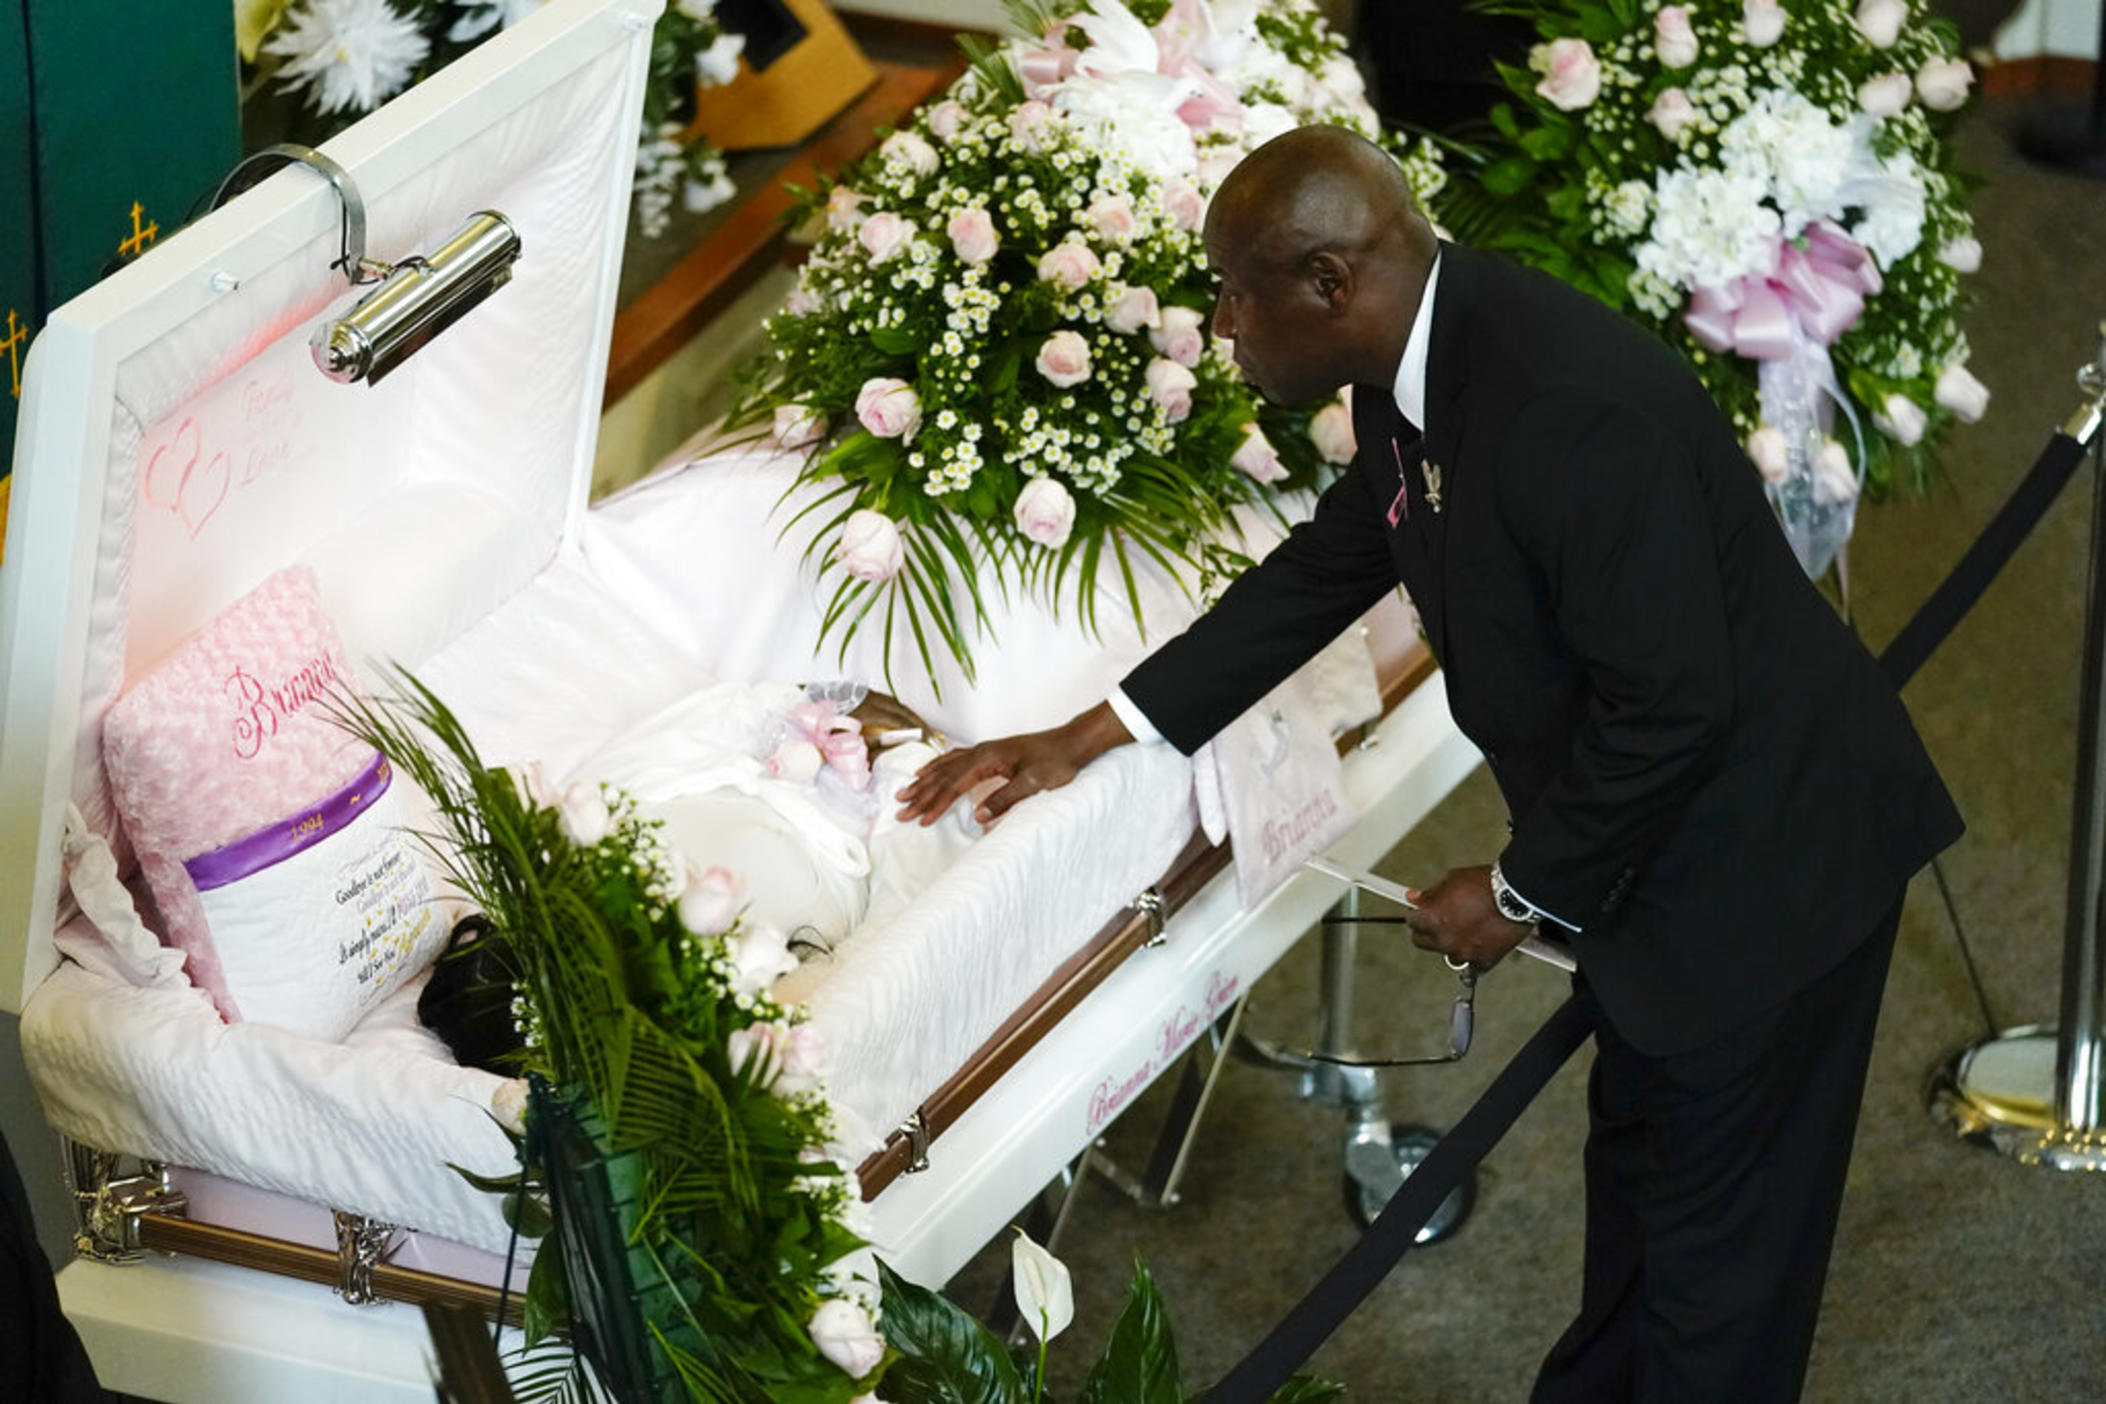 Attorney Ben Crump pays his respects during a funeral service for Brianna Grier Thursday, Aug. 11, 2022, in Atlanta. The 28-year-old Georgia woman died after she fell from a moving patrol car following her arrest.